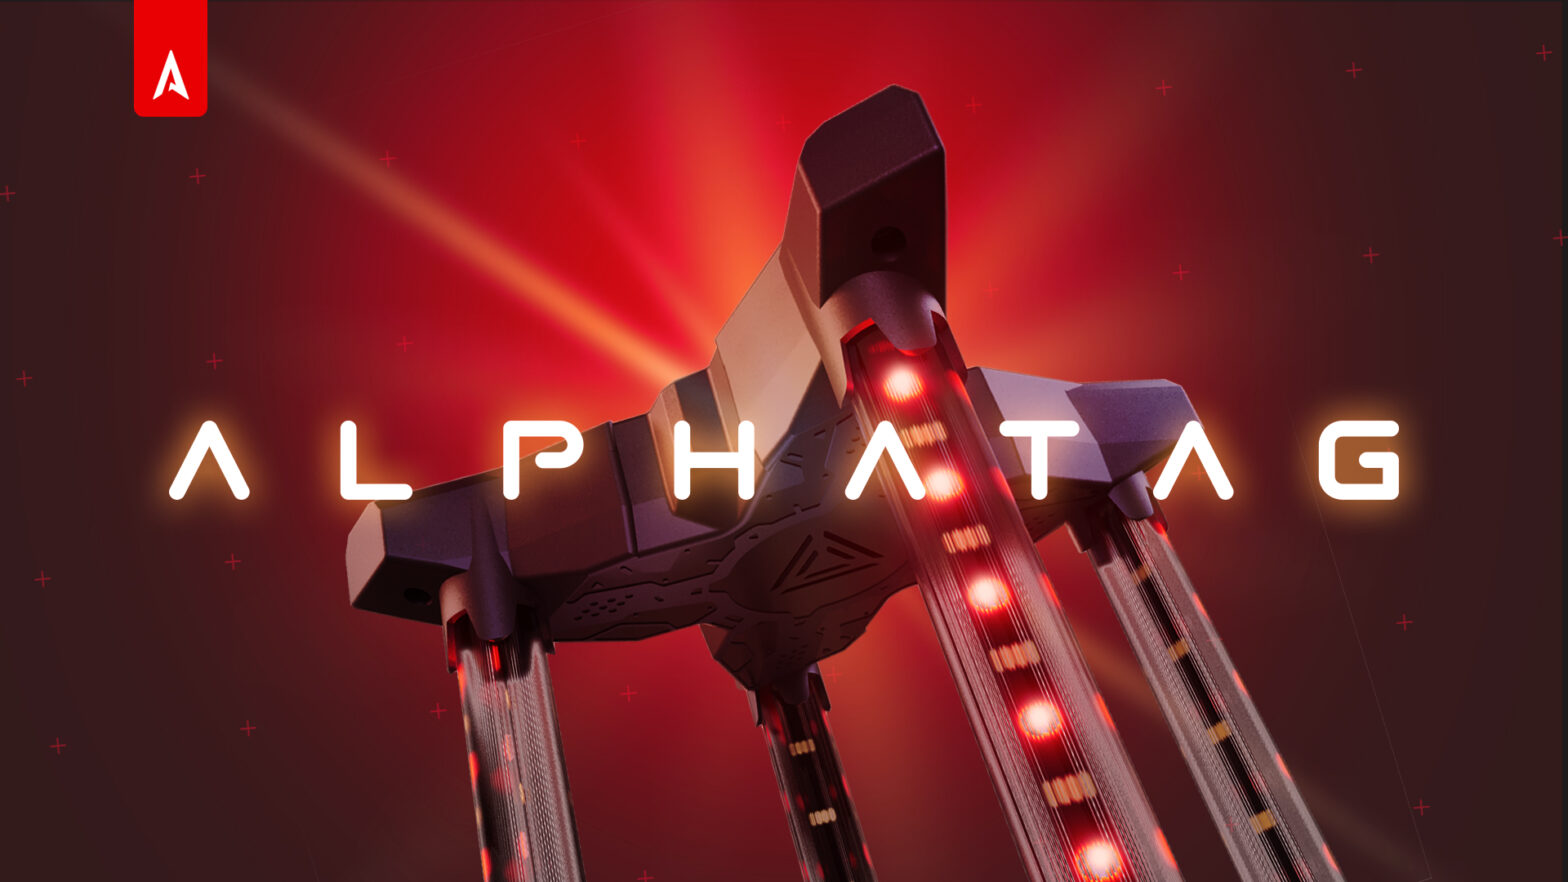 Alphatag server update. Even more opportunities now!